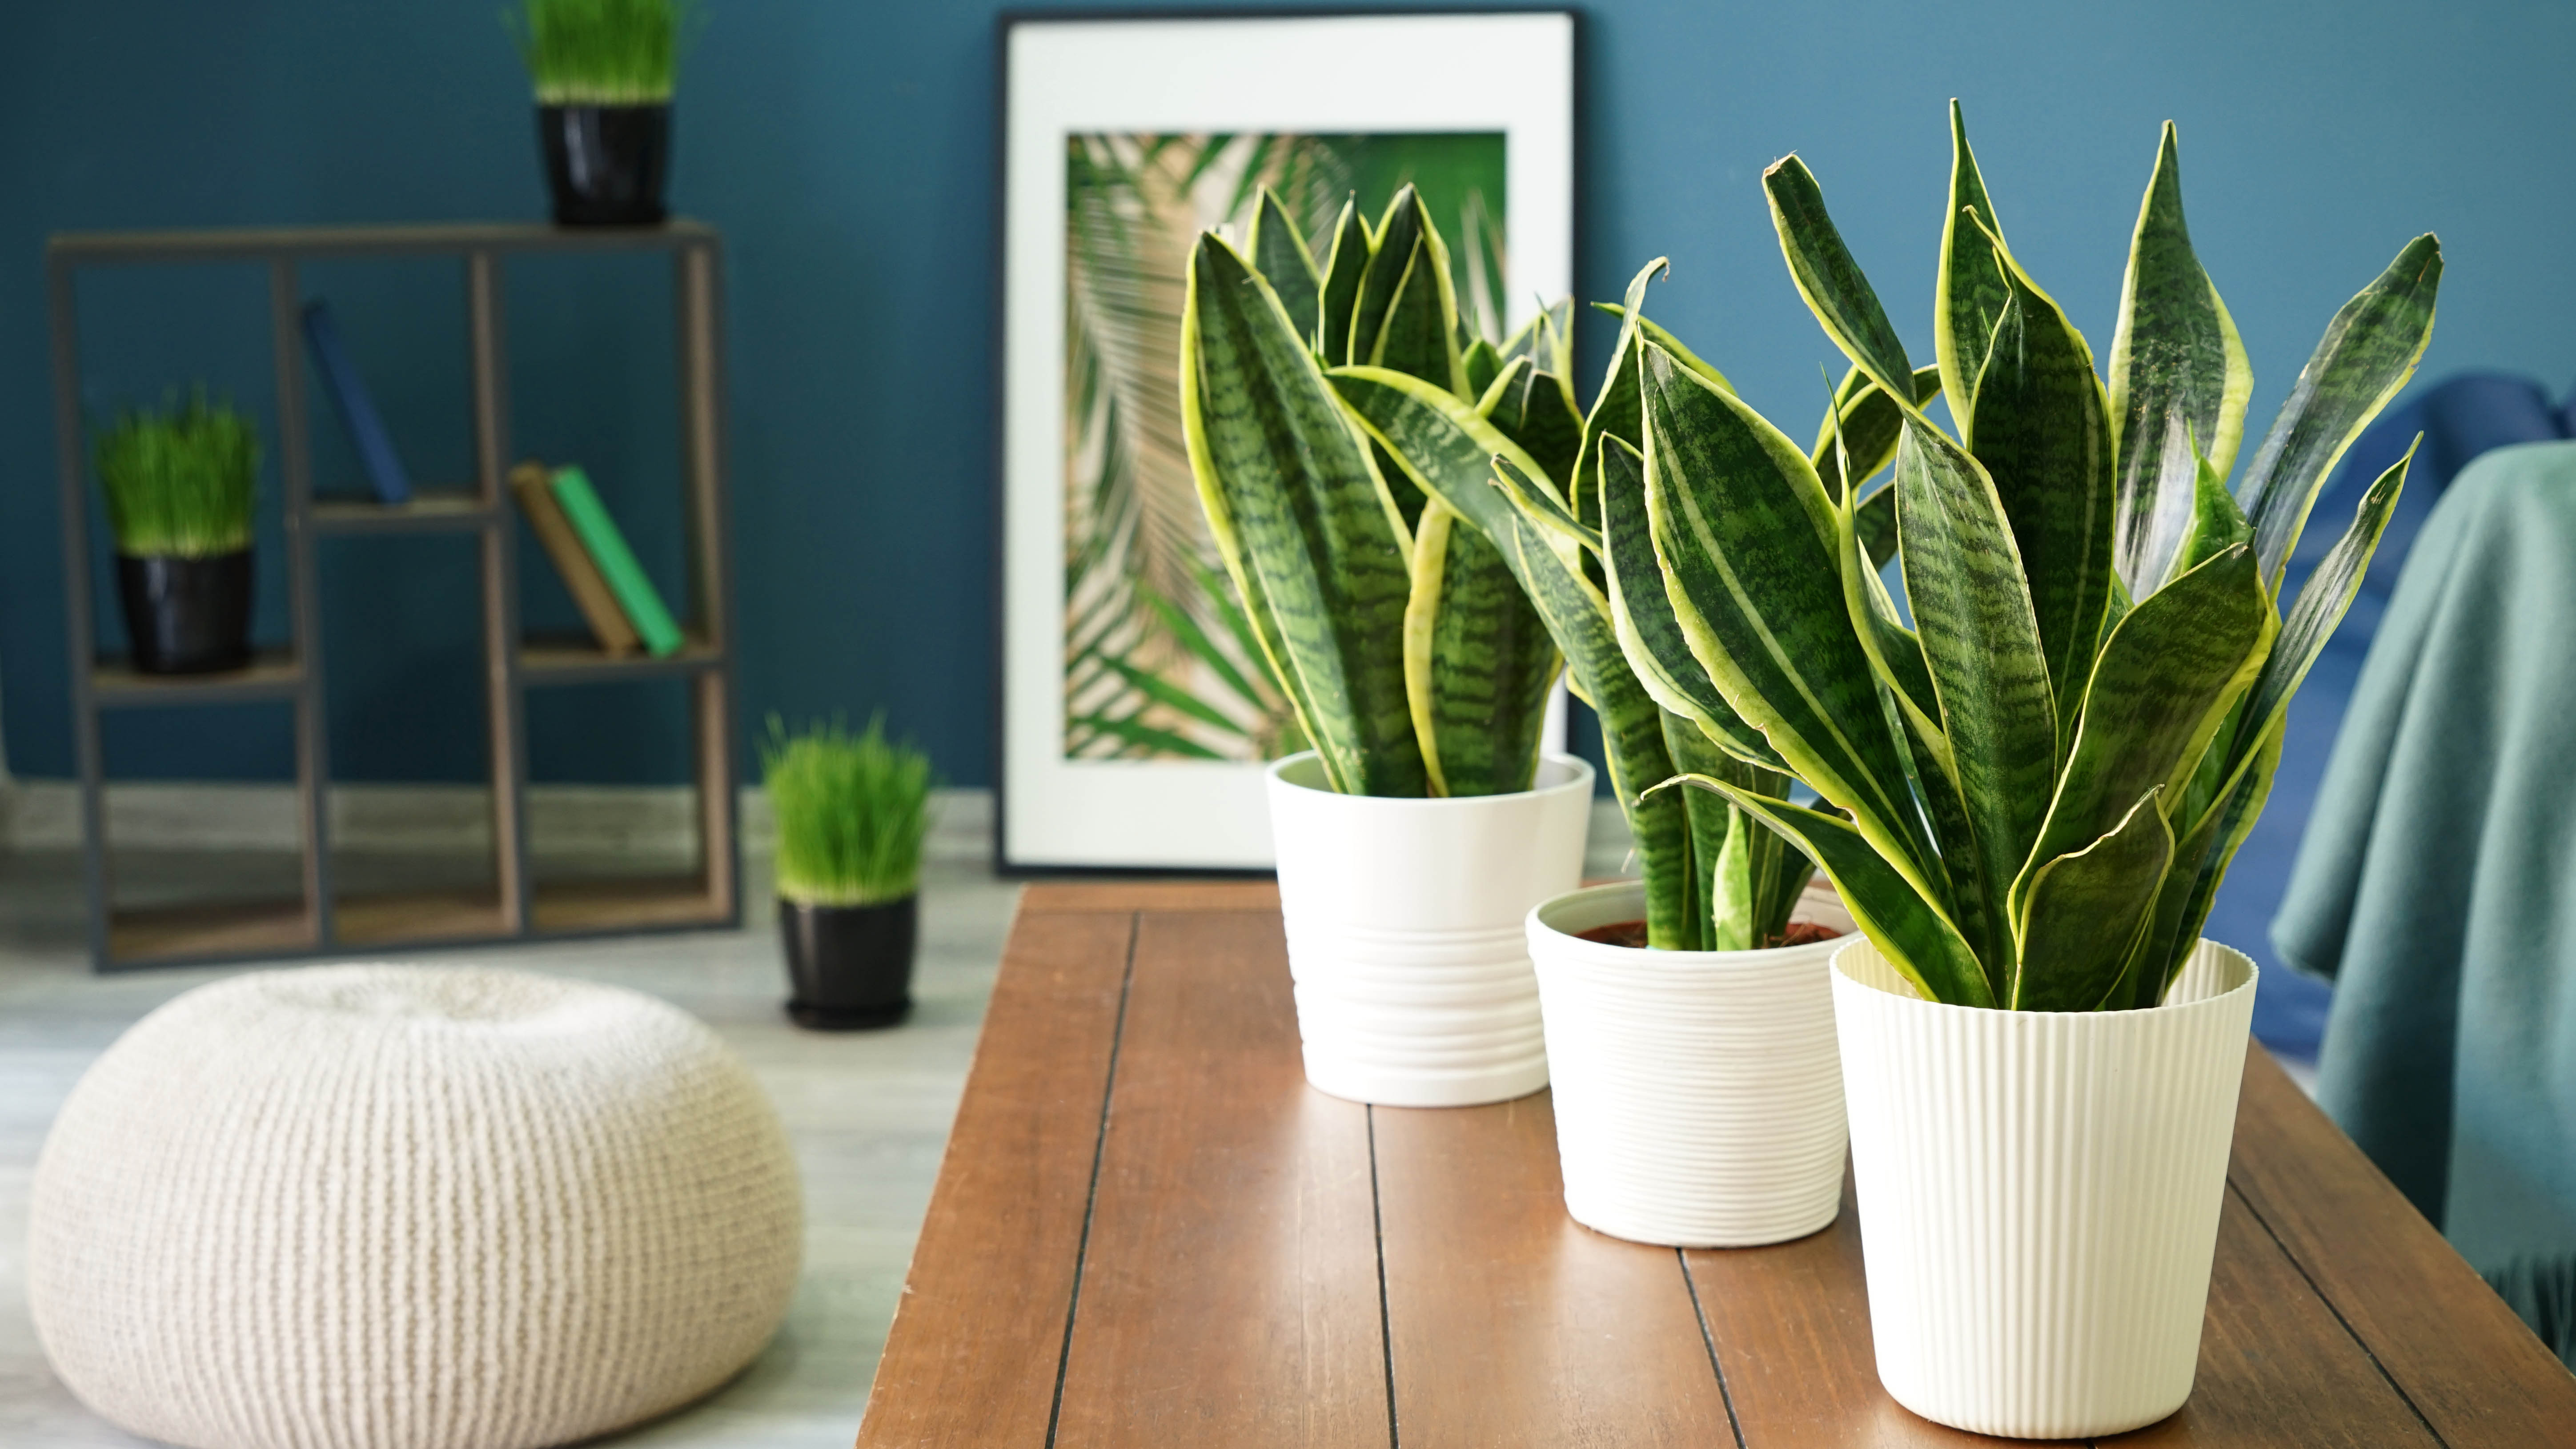 Three snake plants on a table next to a photo frame